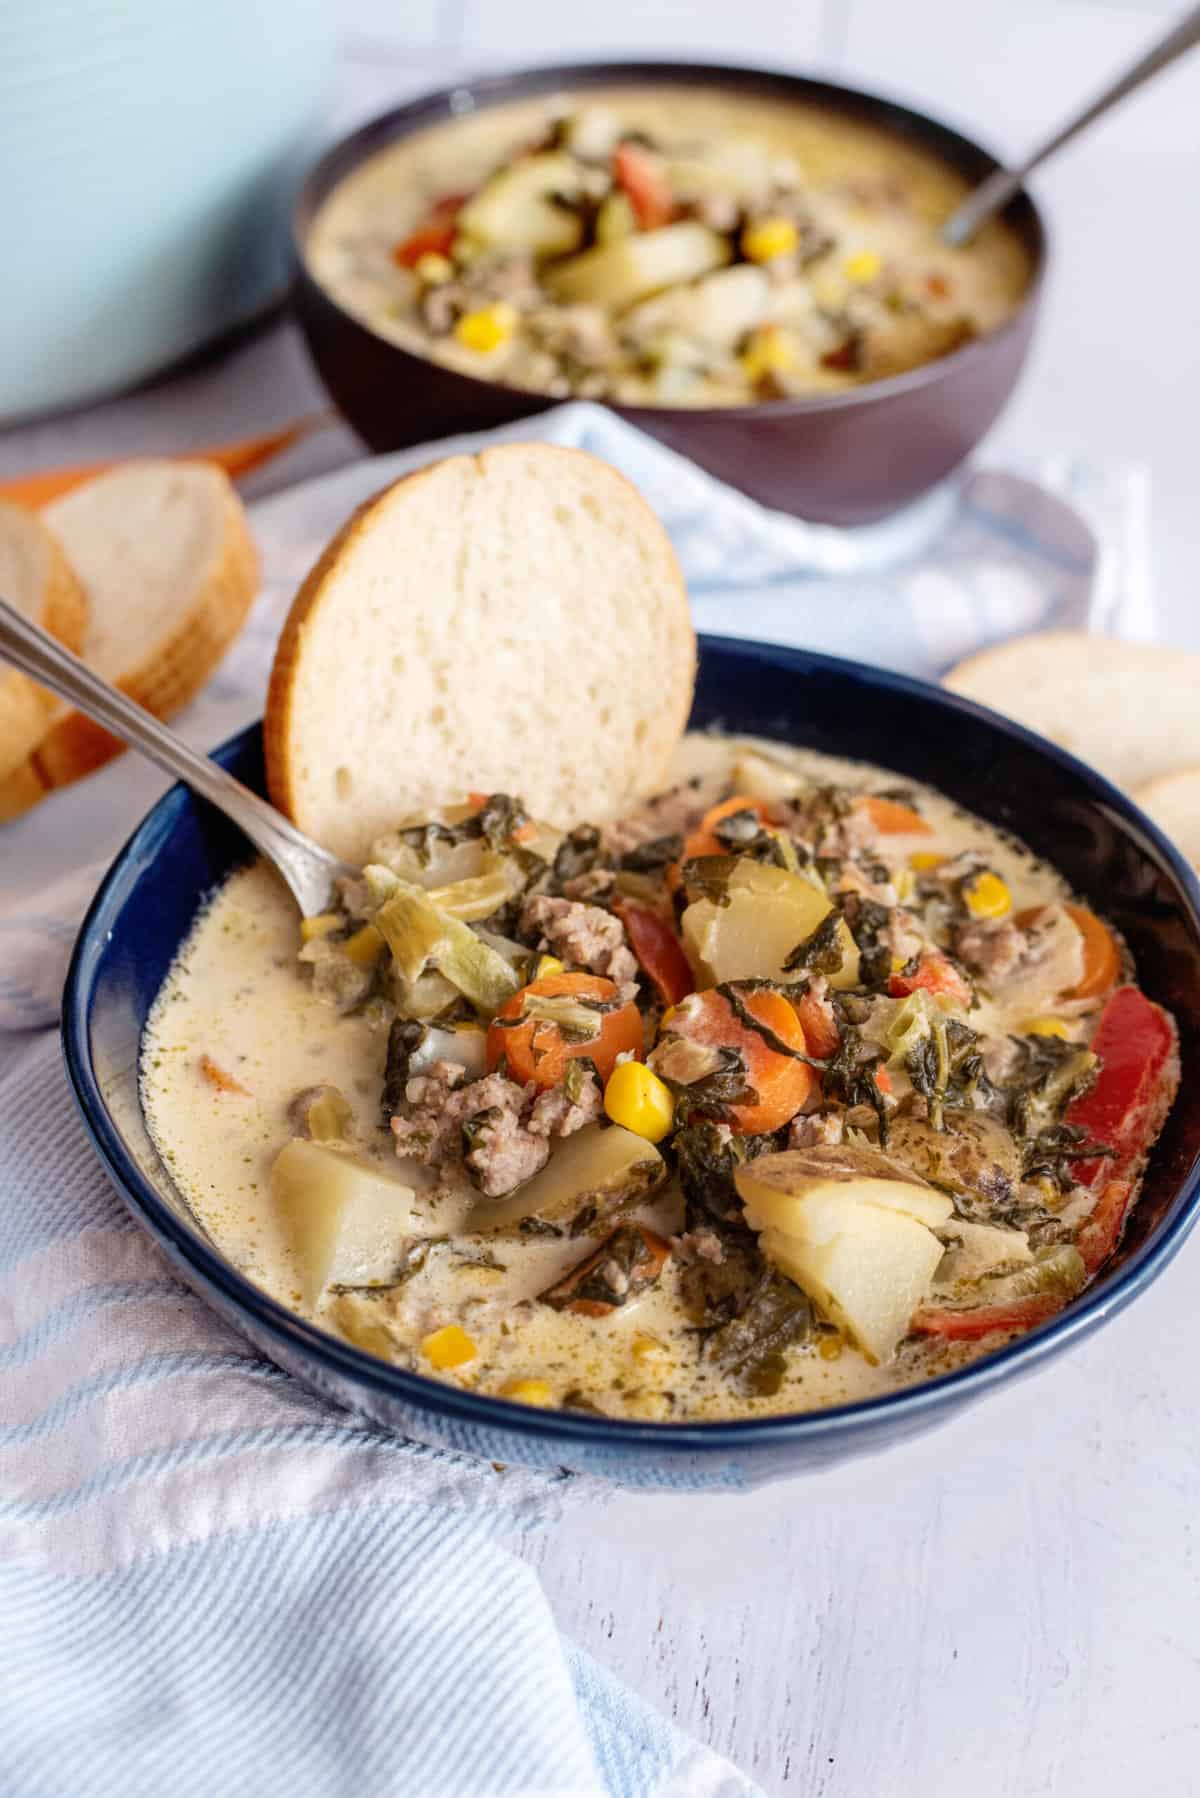 serve country chowder hot with bread